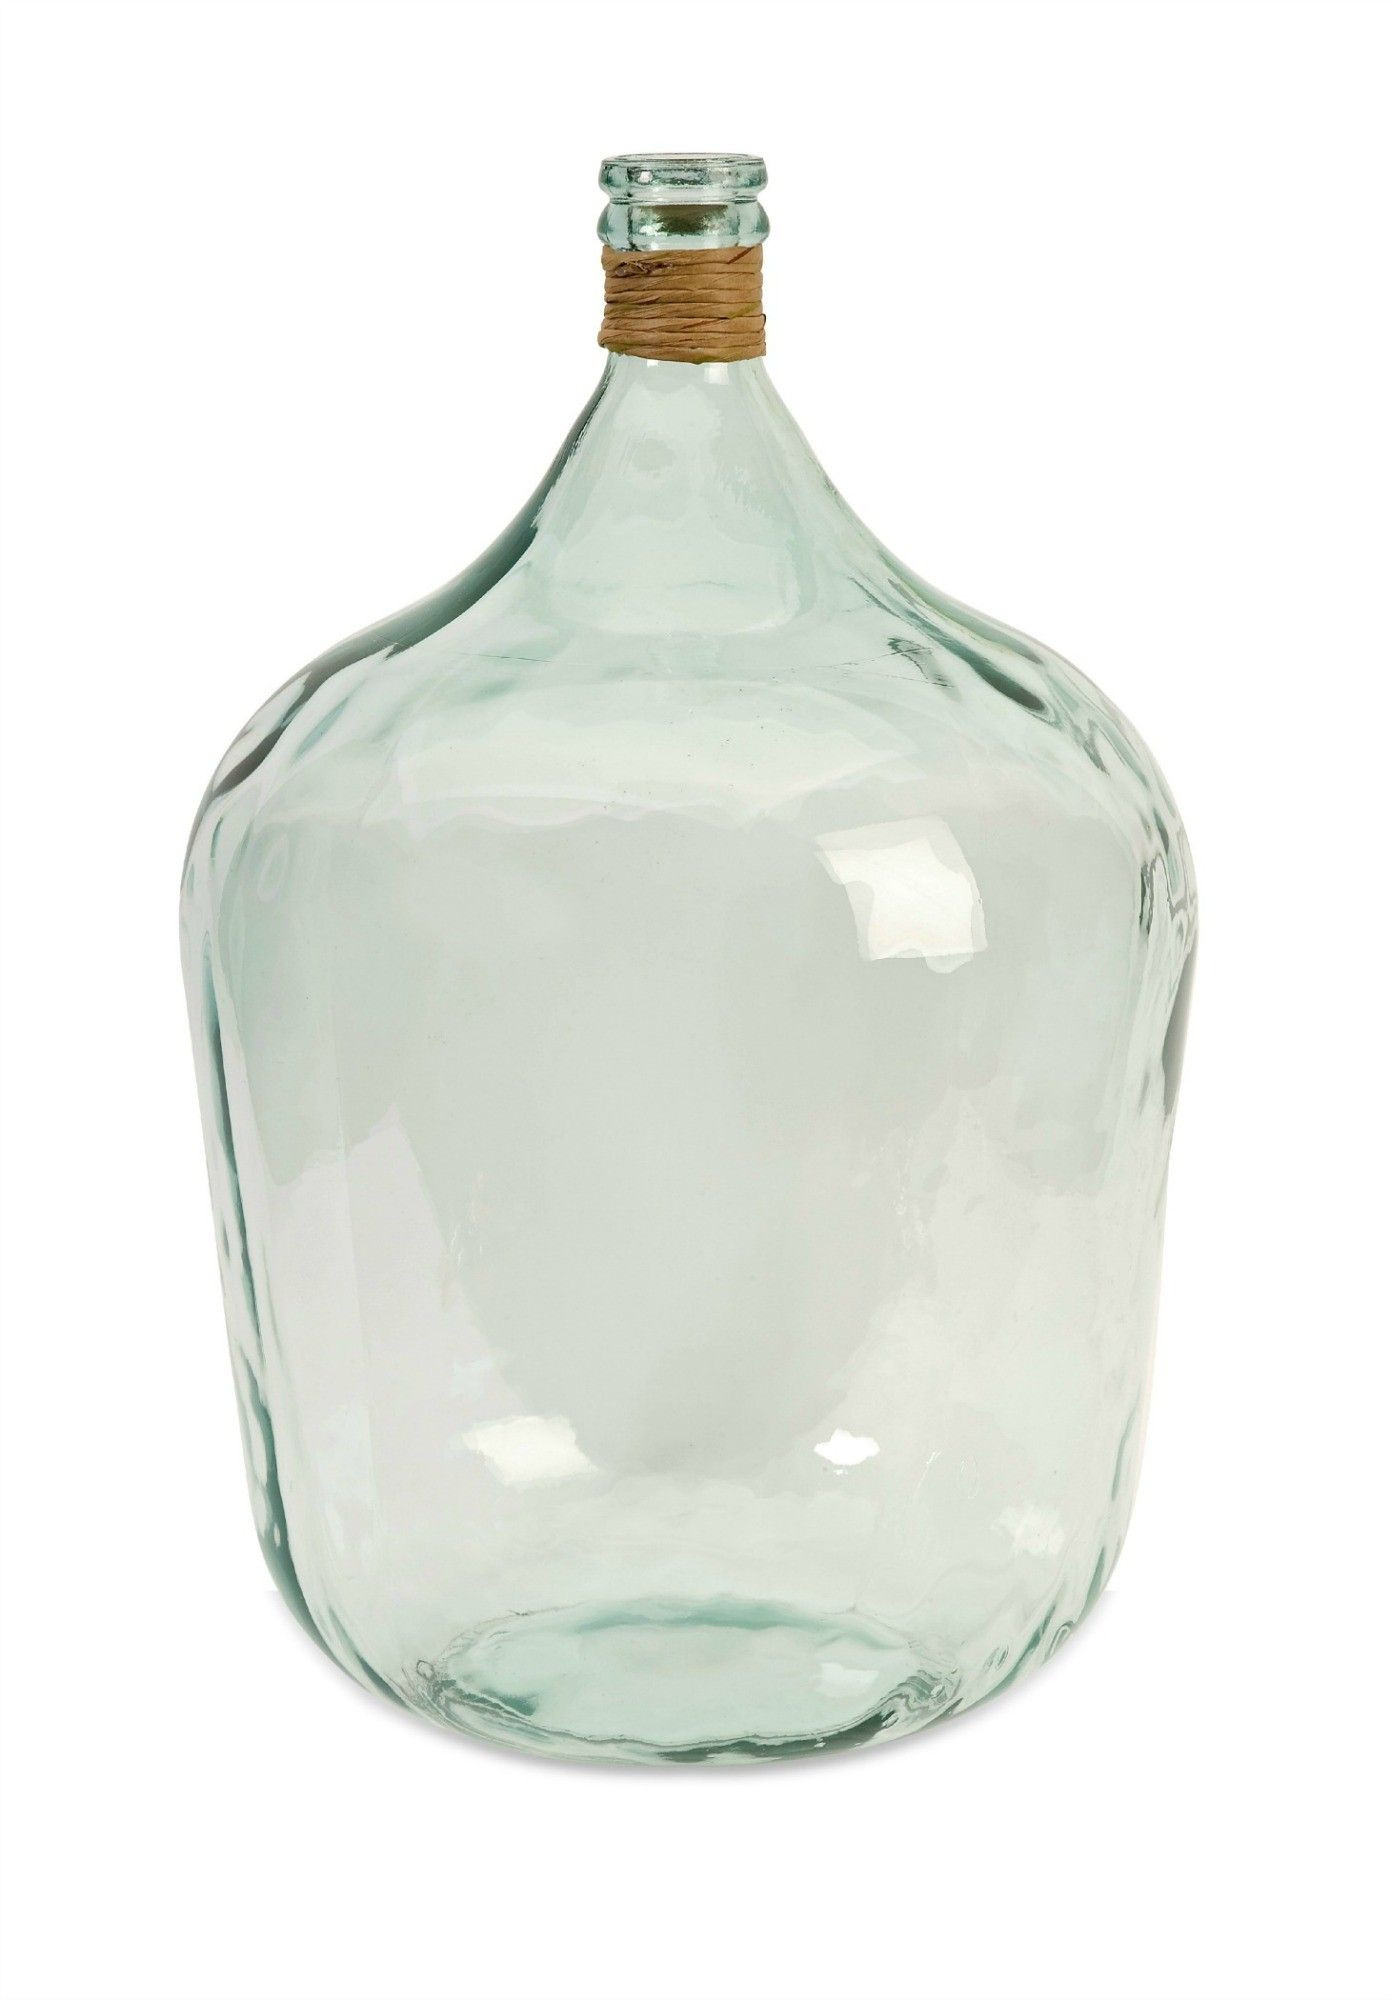 cheap recycled glass vases of boccioni large recycled glass jug would be pretty filled with inside boccioni large recycled glass jug would be pretty filled with beach glass finds